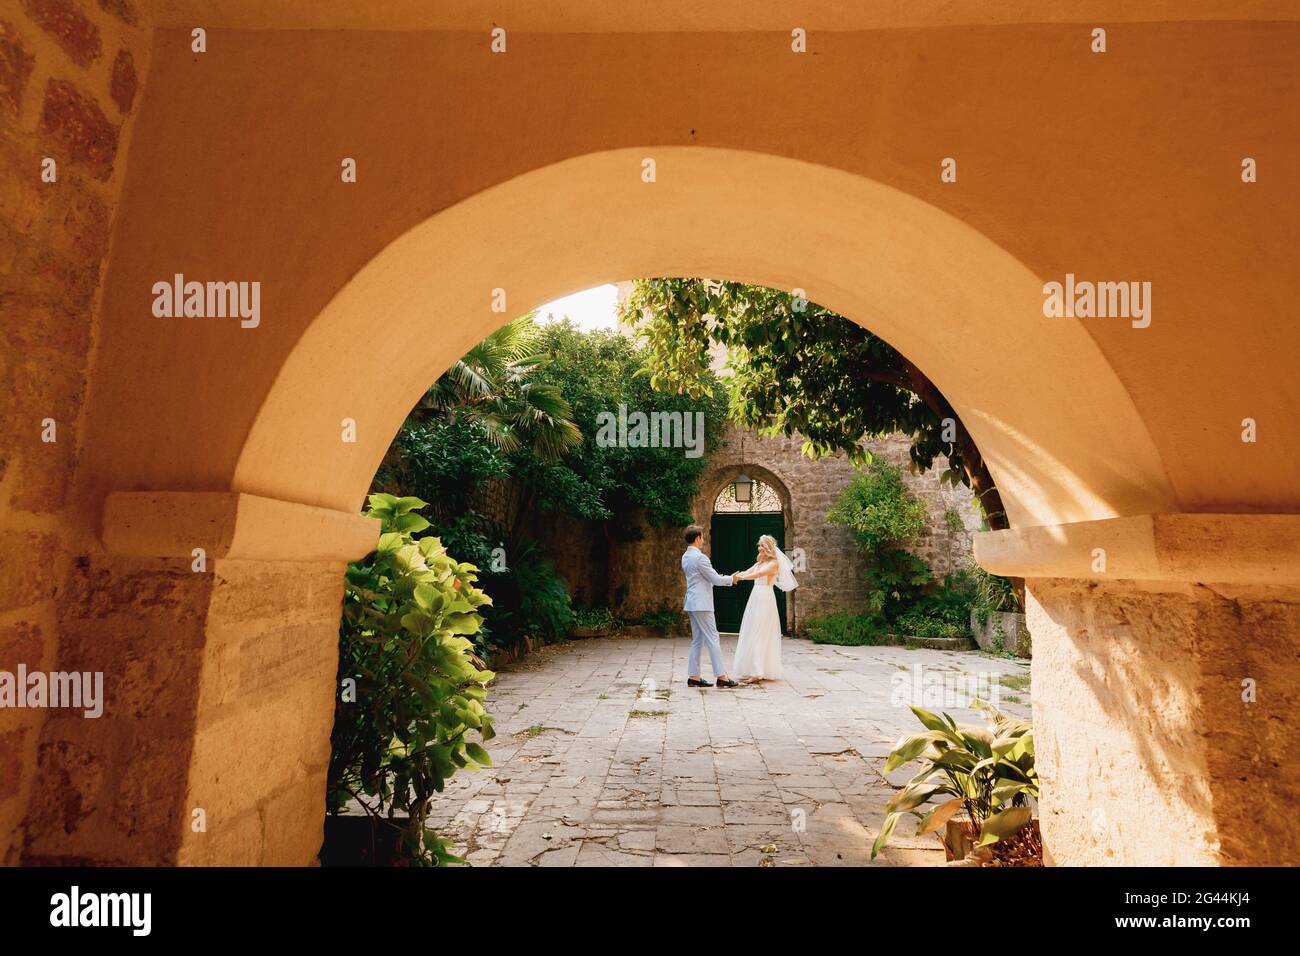 The bride and groom dancing and circling in the coutryard in the old town of Perast, view through the arch Stock Photo